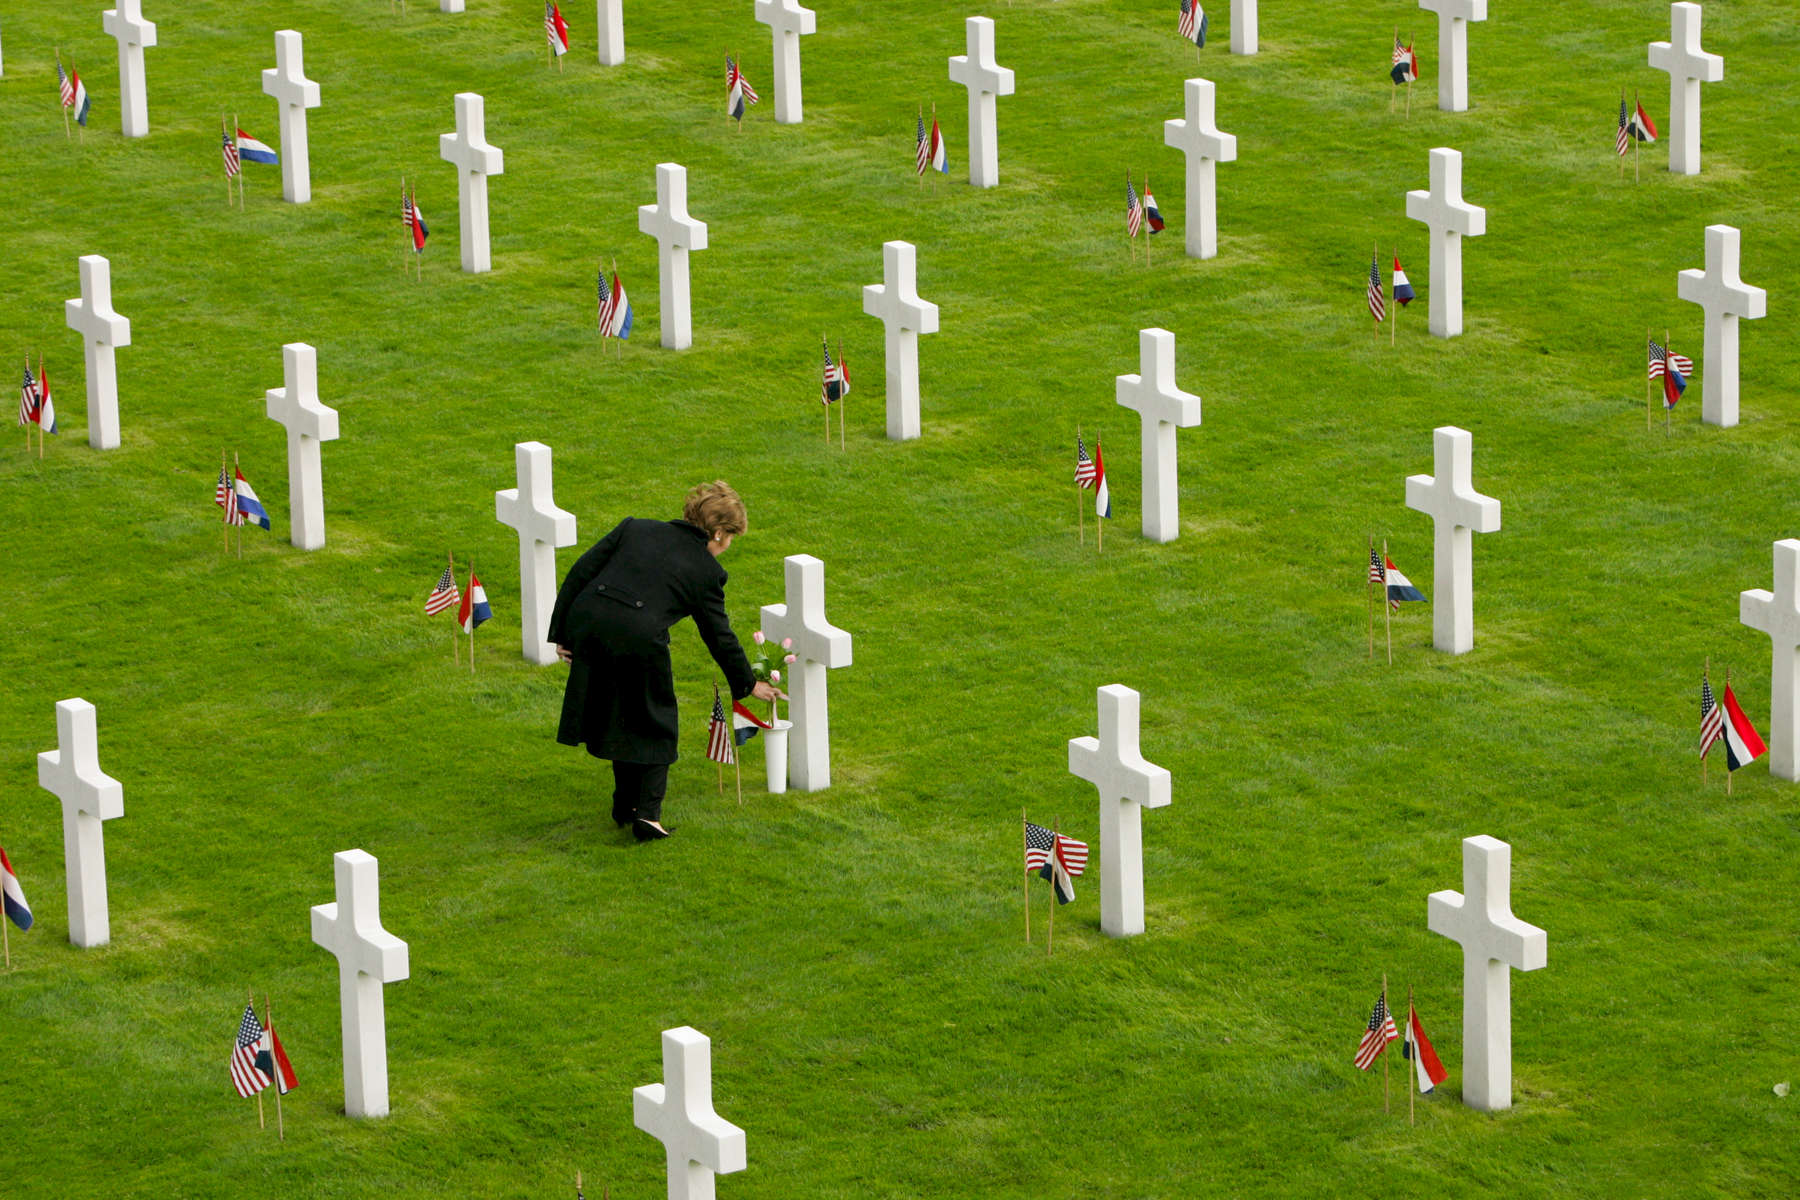 President Bush, Laura Bush: Netherlands American Cemetery and Memorial. Margraten, Netherlands.  Mrs. Bush lays flowers at the grave of Francis A. Pate, TEC 5, Illinois, from the 104th Division.